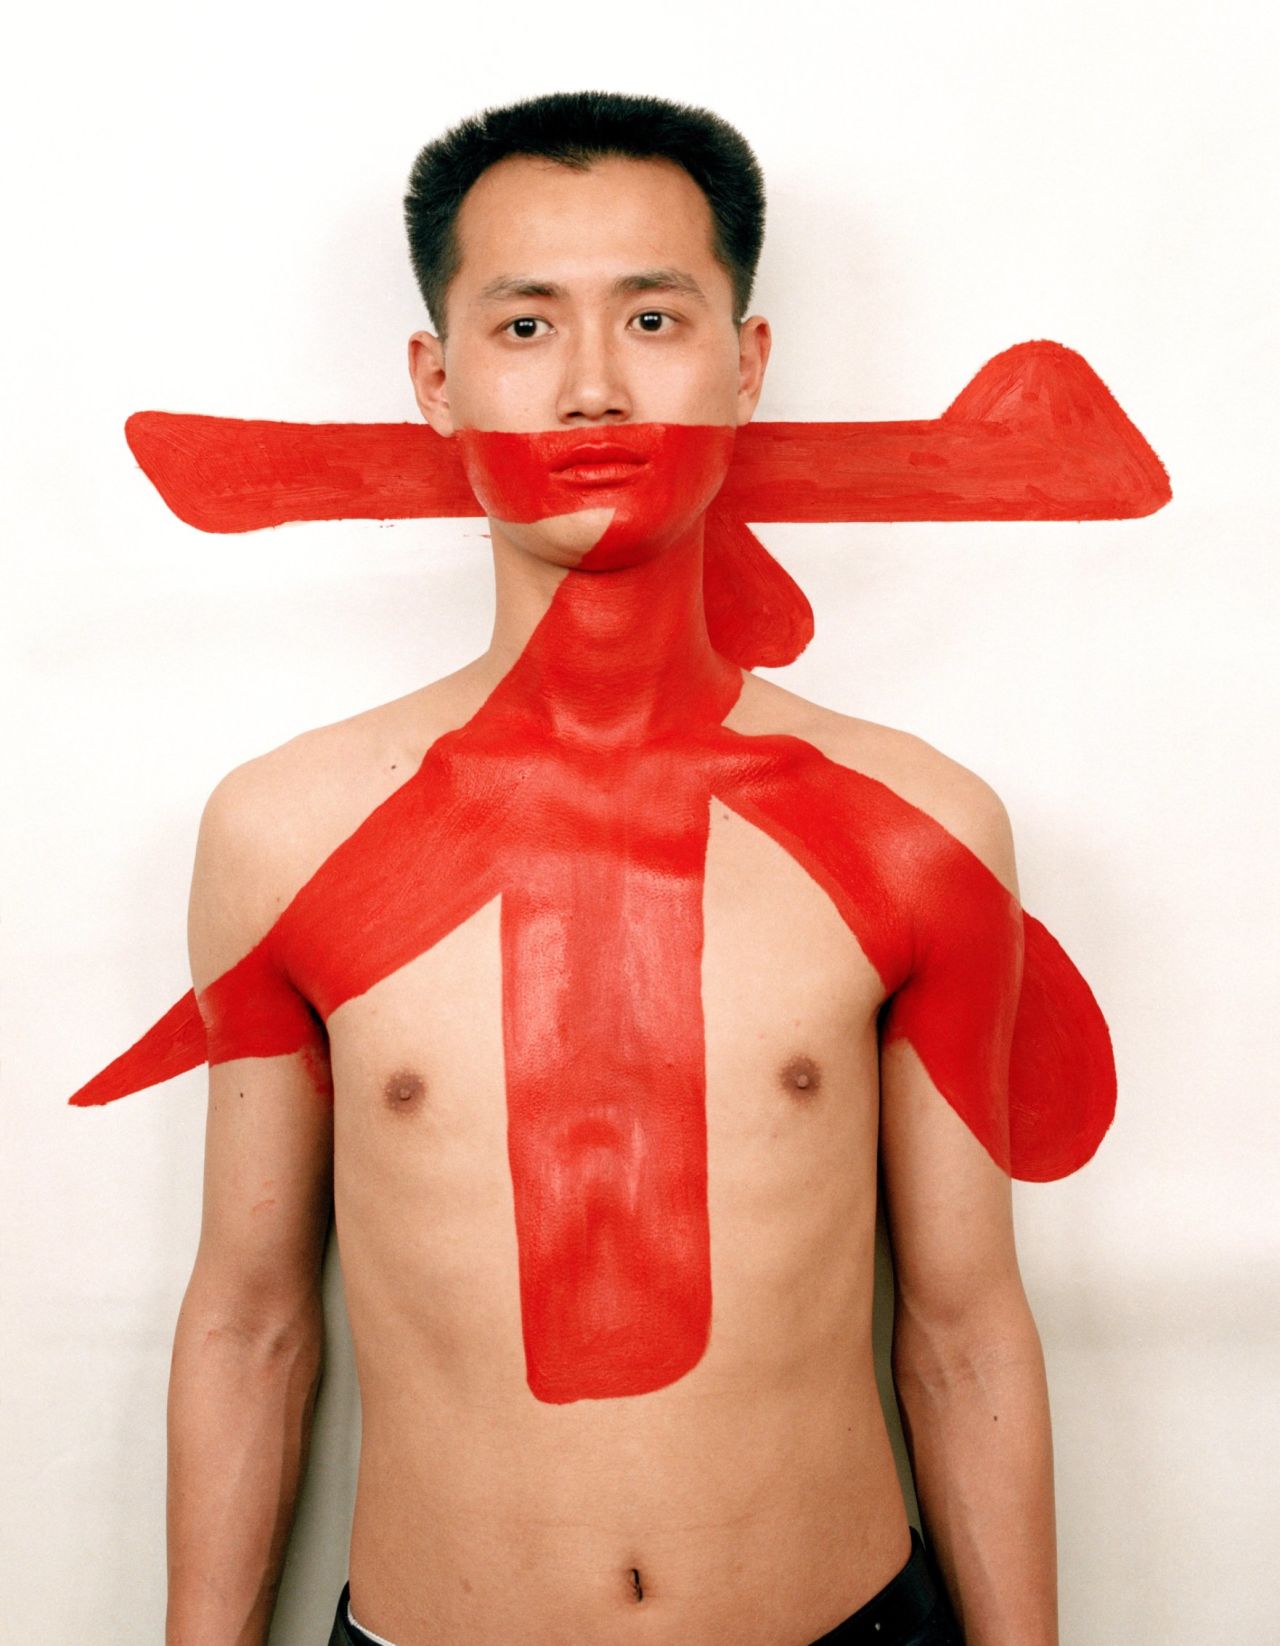 Self-portrait from Qiu Zhijie's "Tattoo" series. The Chinese character "bu" in red translates to "no" in English.